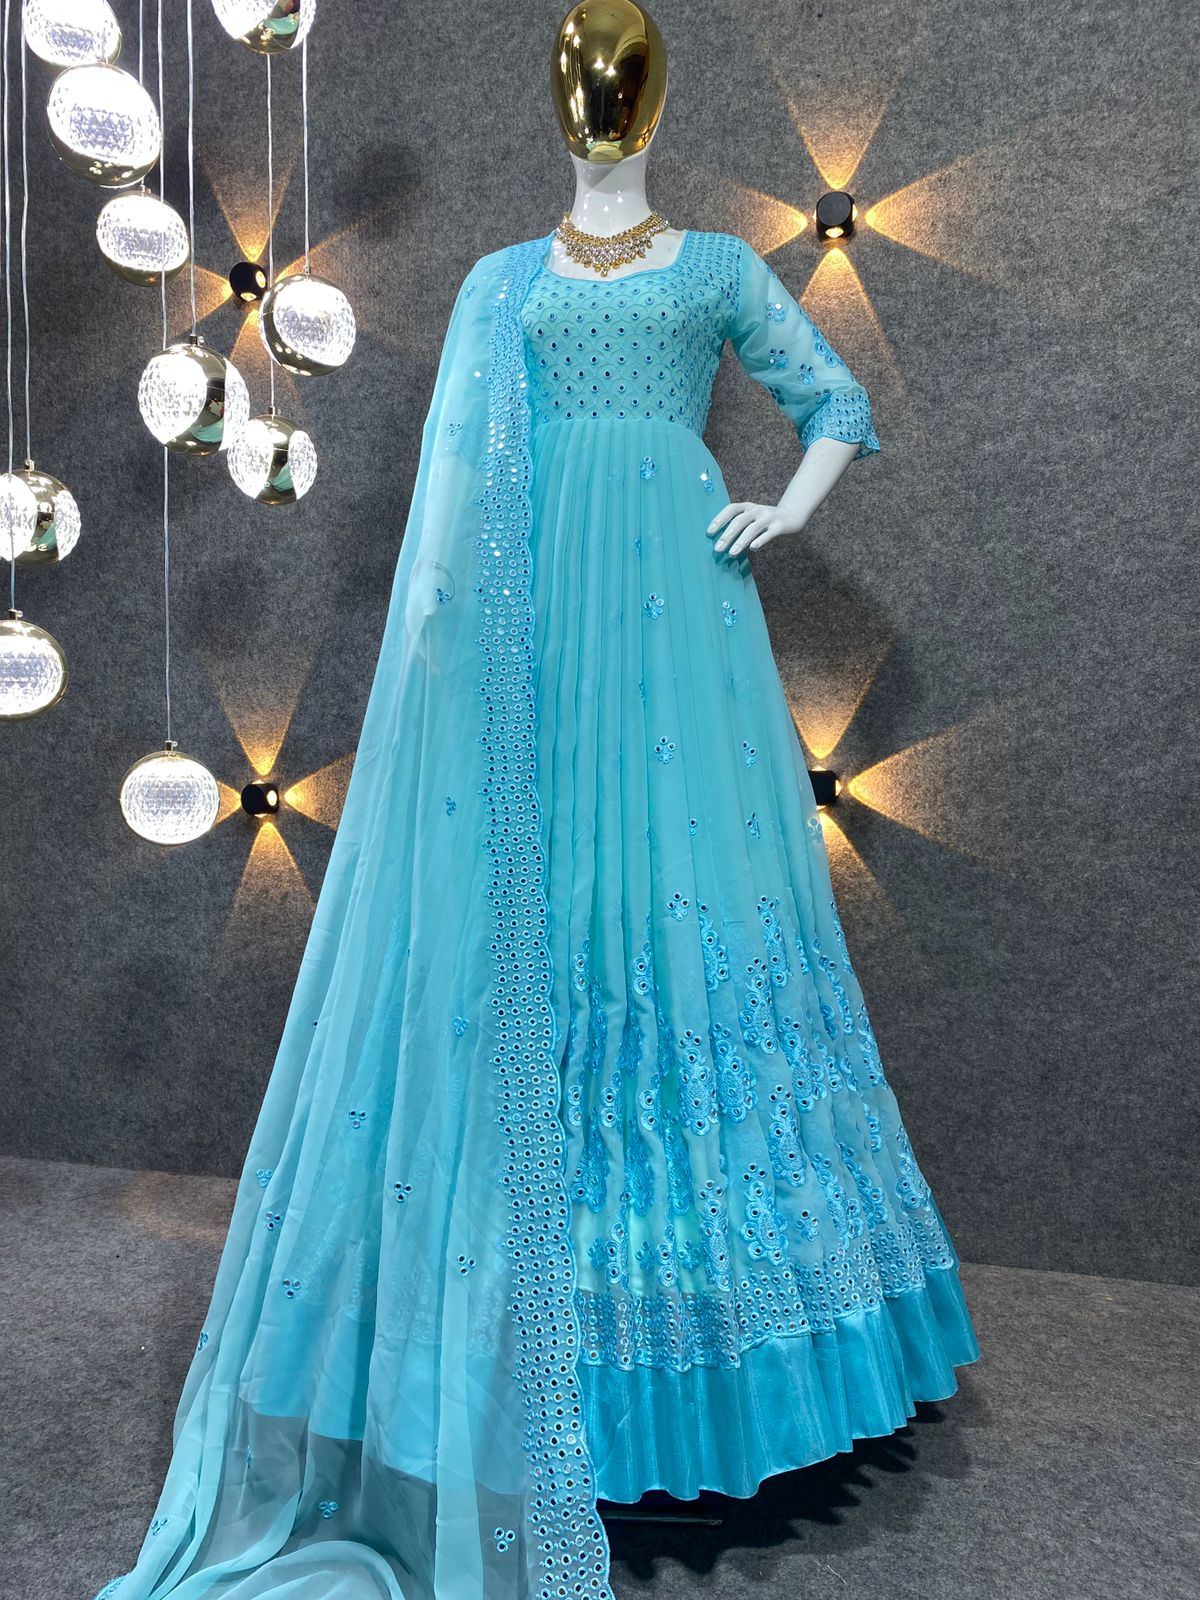 2022 का नया फैशन Latest 2022 Net Gown, Crop Top, Indo Western Design |  Manufacturing Price Dresses | महिलाओ के लिए अभी CLICK करे Download Now :  http://bit.ly/2TdlPiH ...